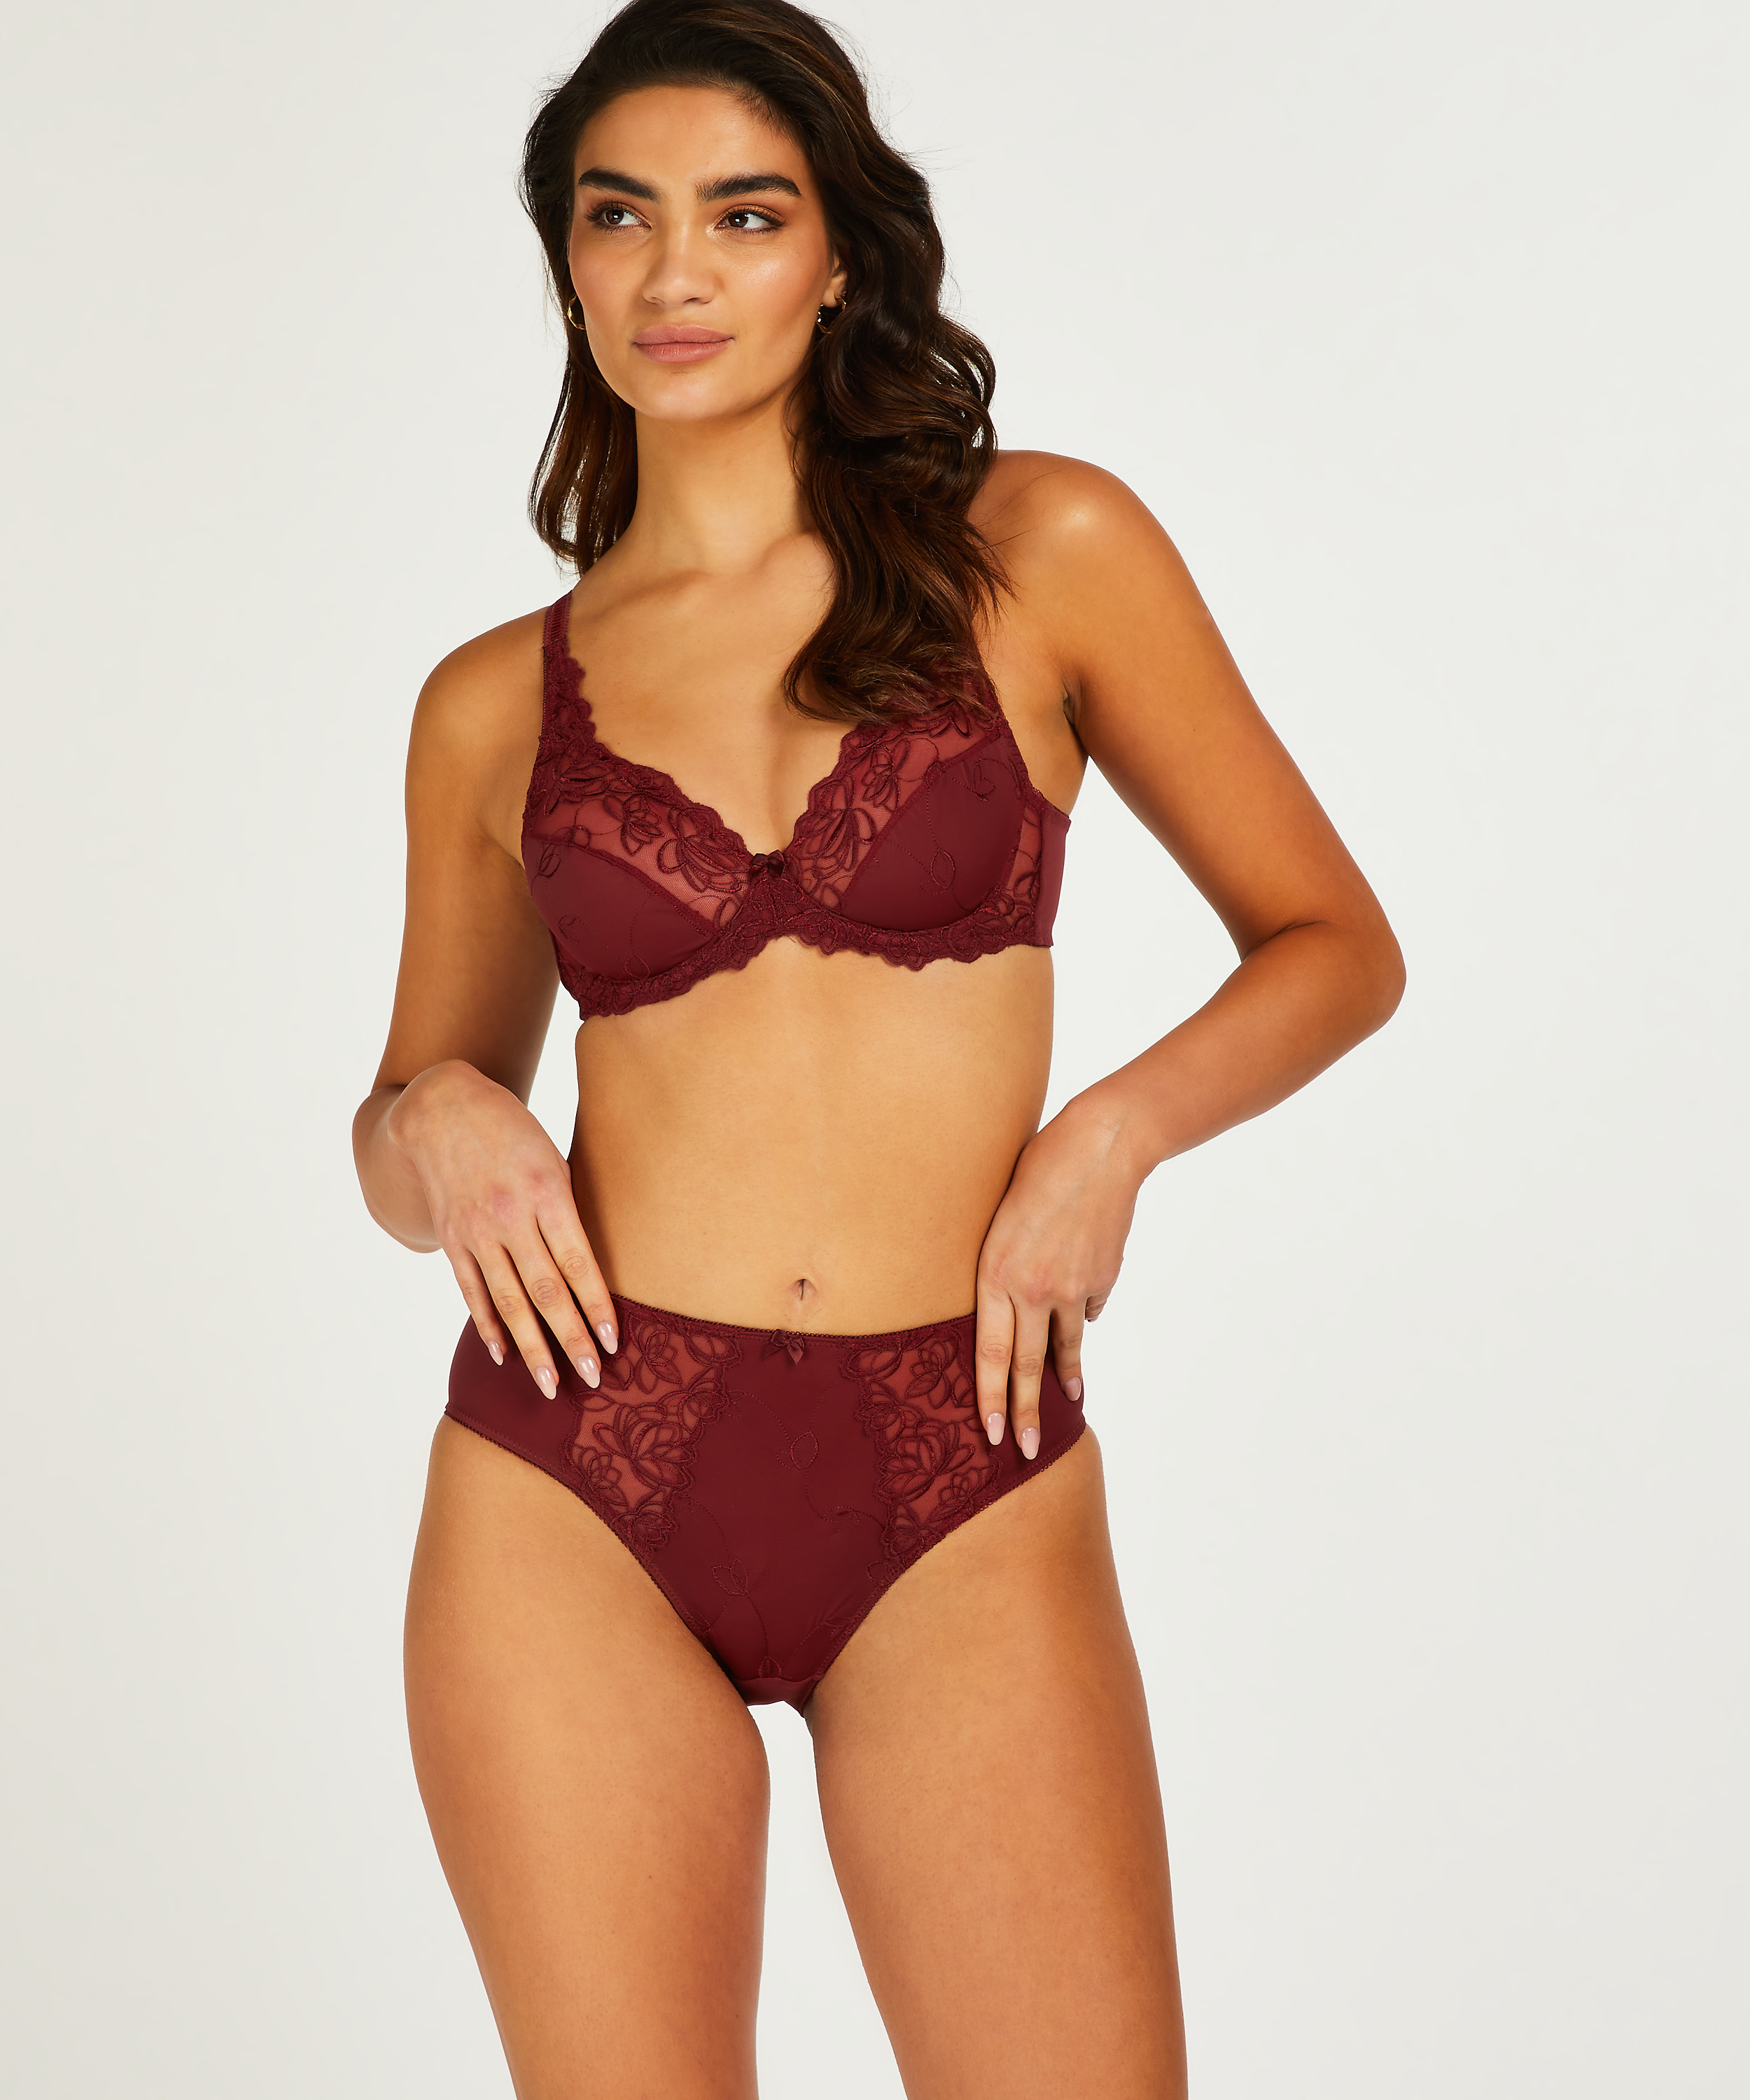 Diva high knickers, Red, main